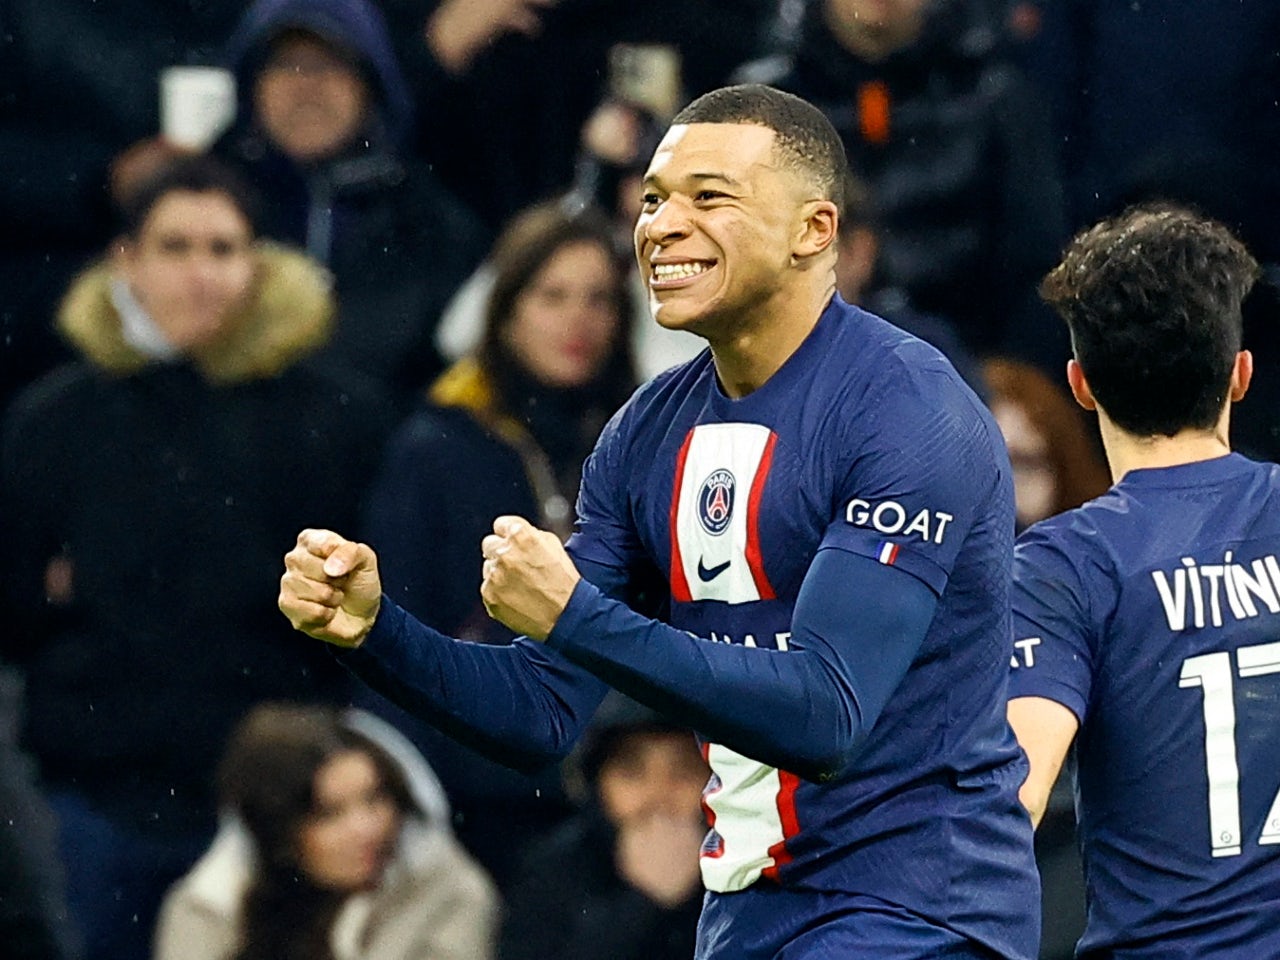 Mbappe at the double as PSG thump Lyon away